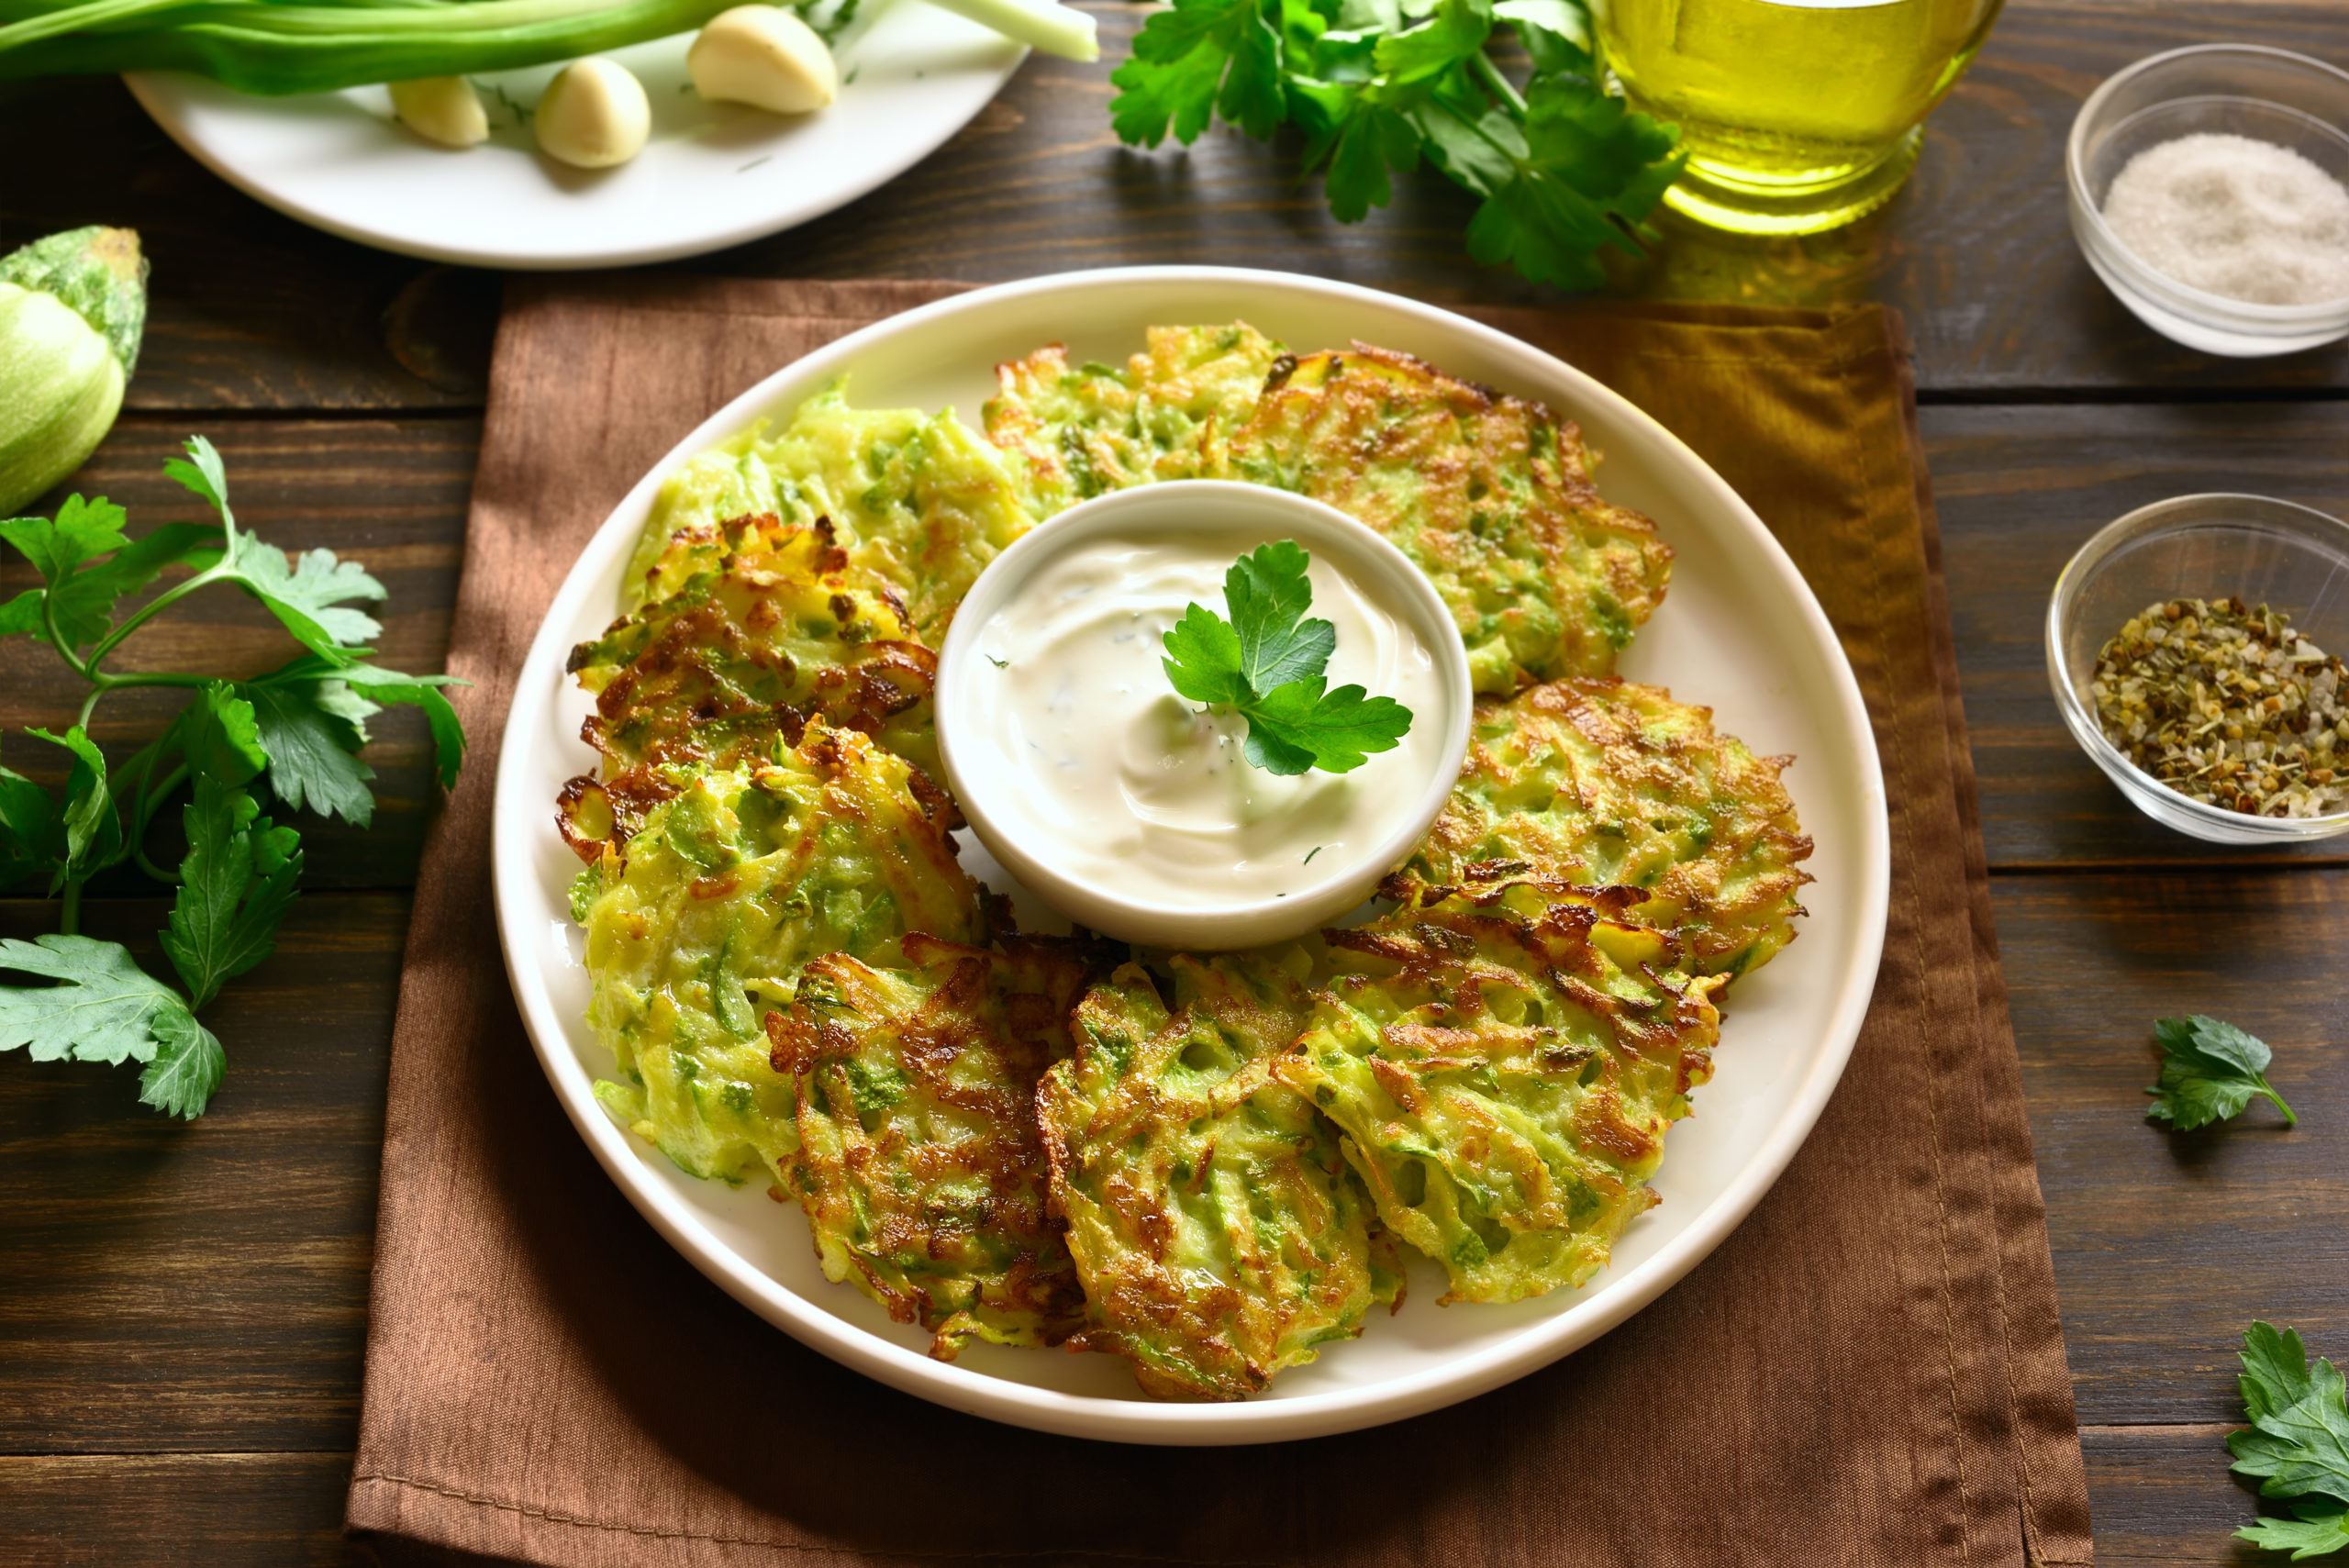 pancakes made with zucchini on a white plate served with a sour cream sauce in a white bowl